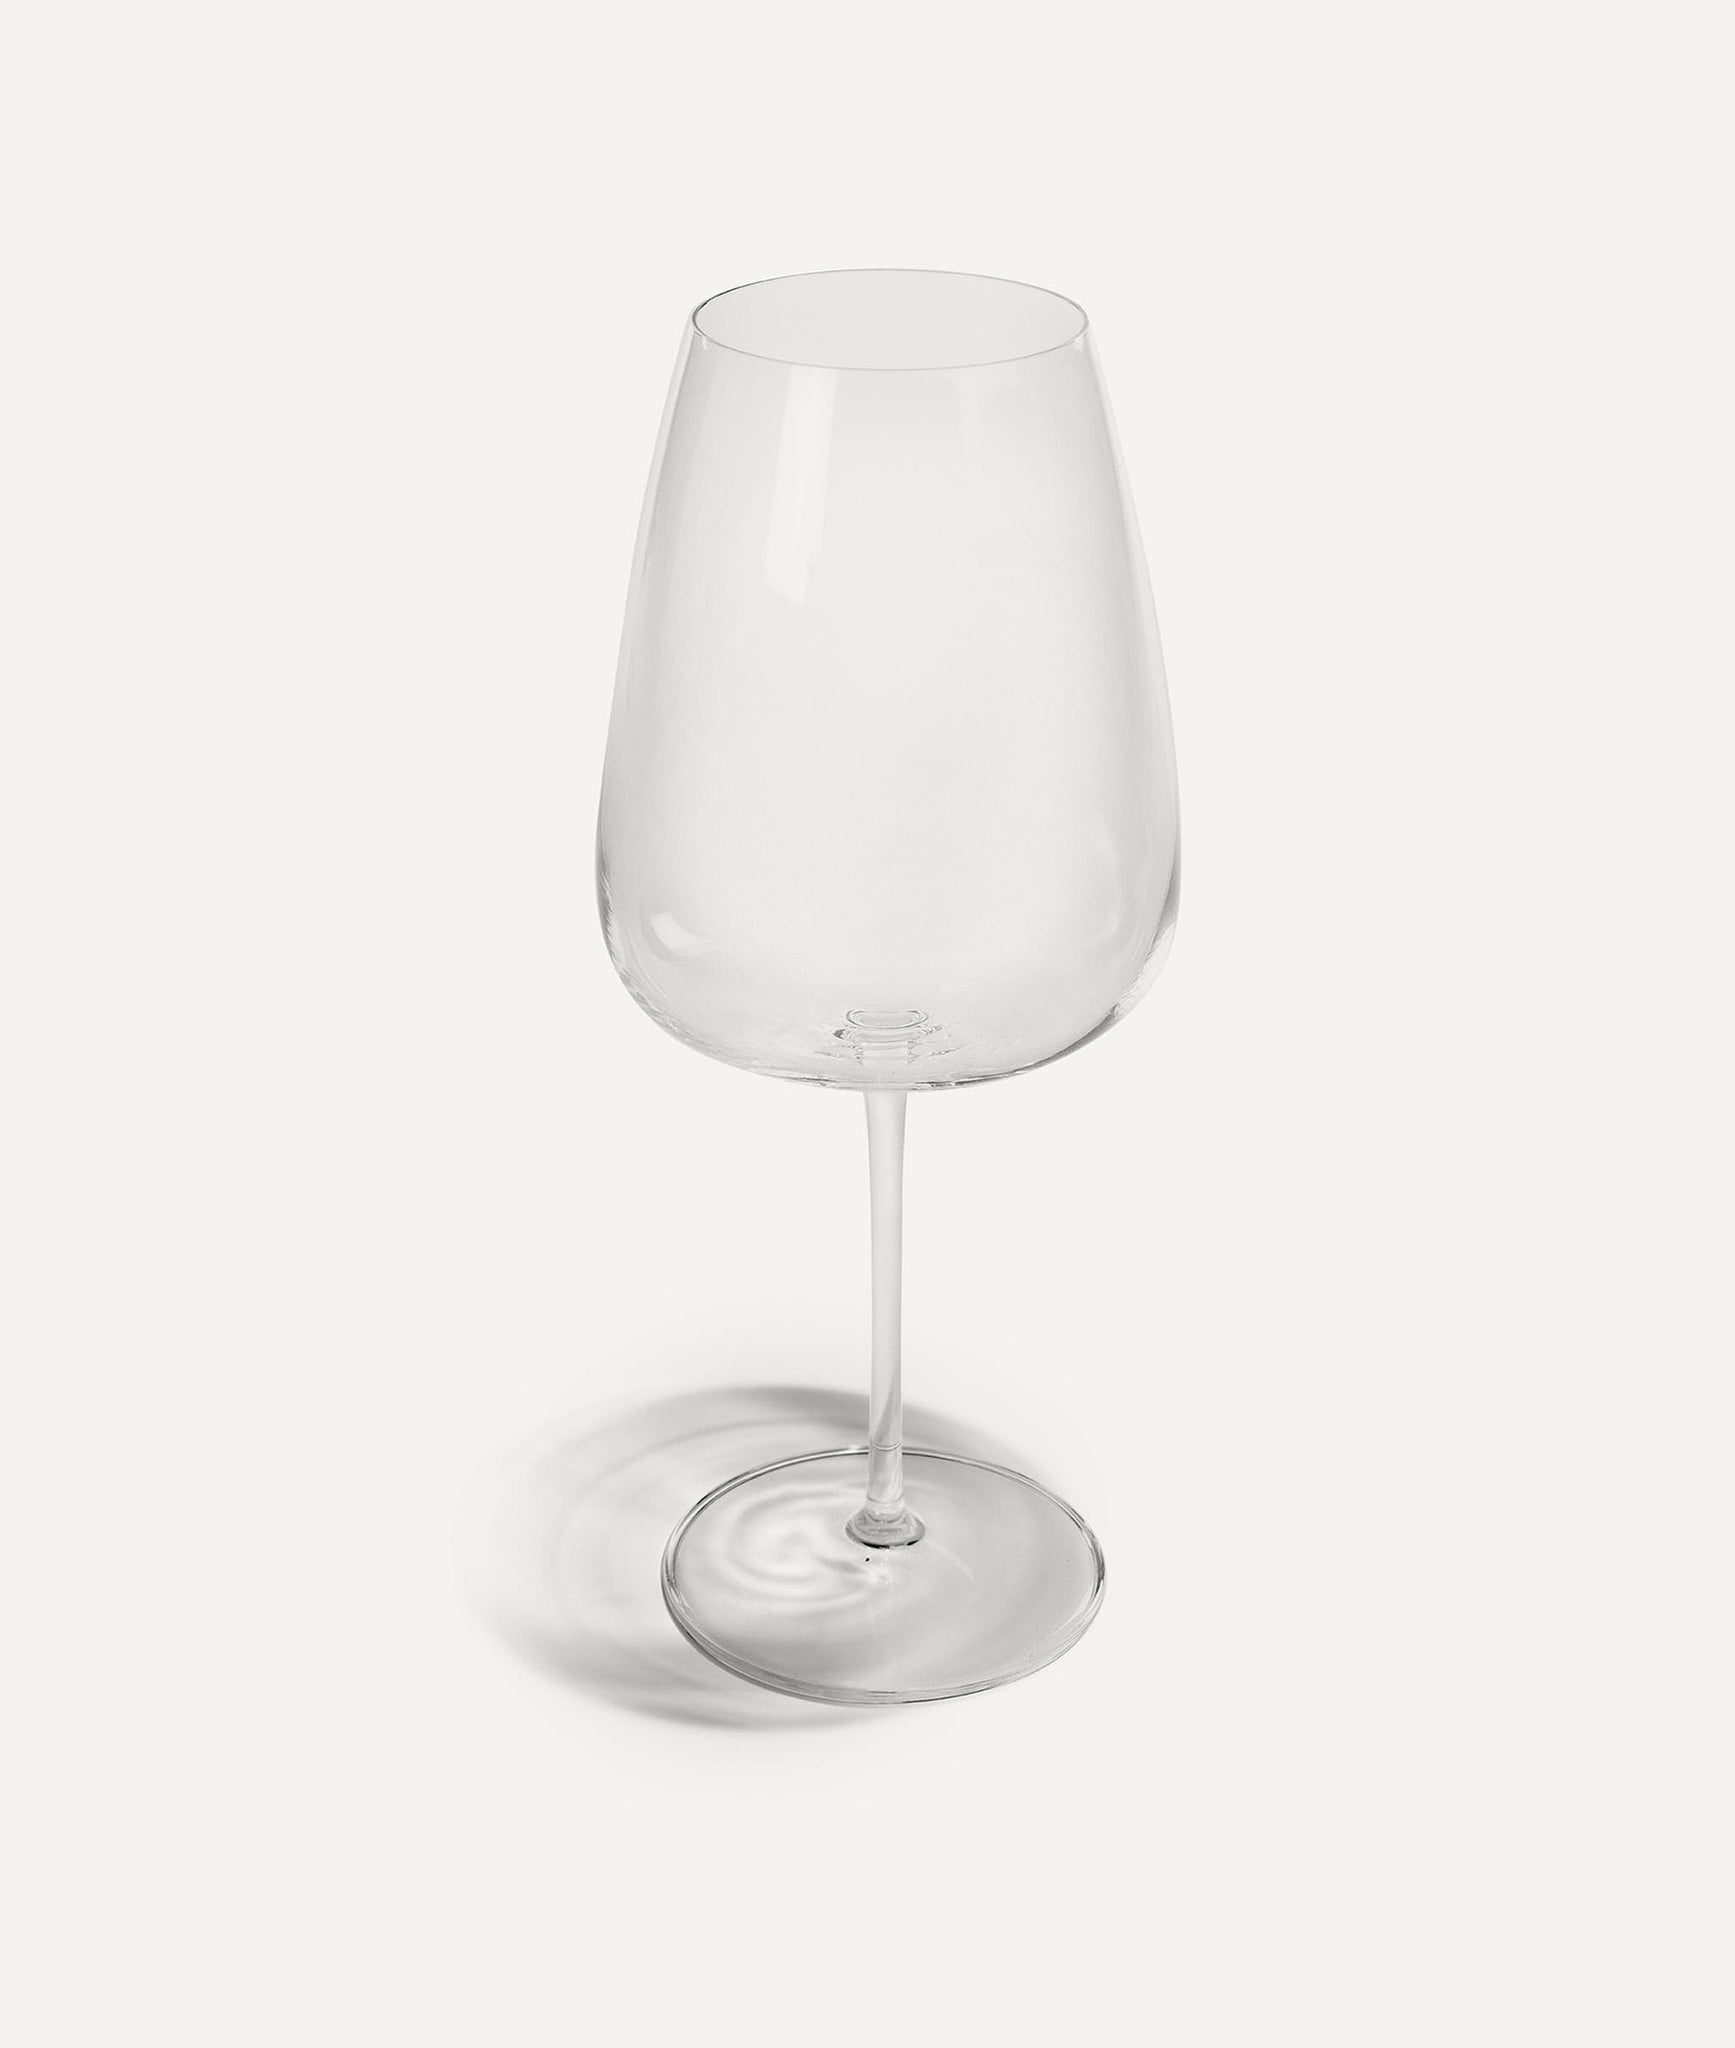 Riesling Glass - Set of 6